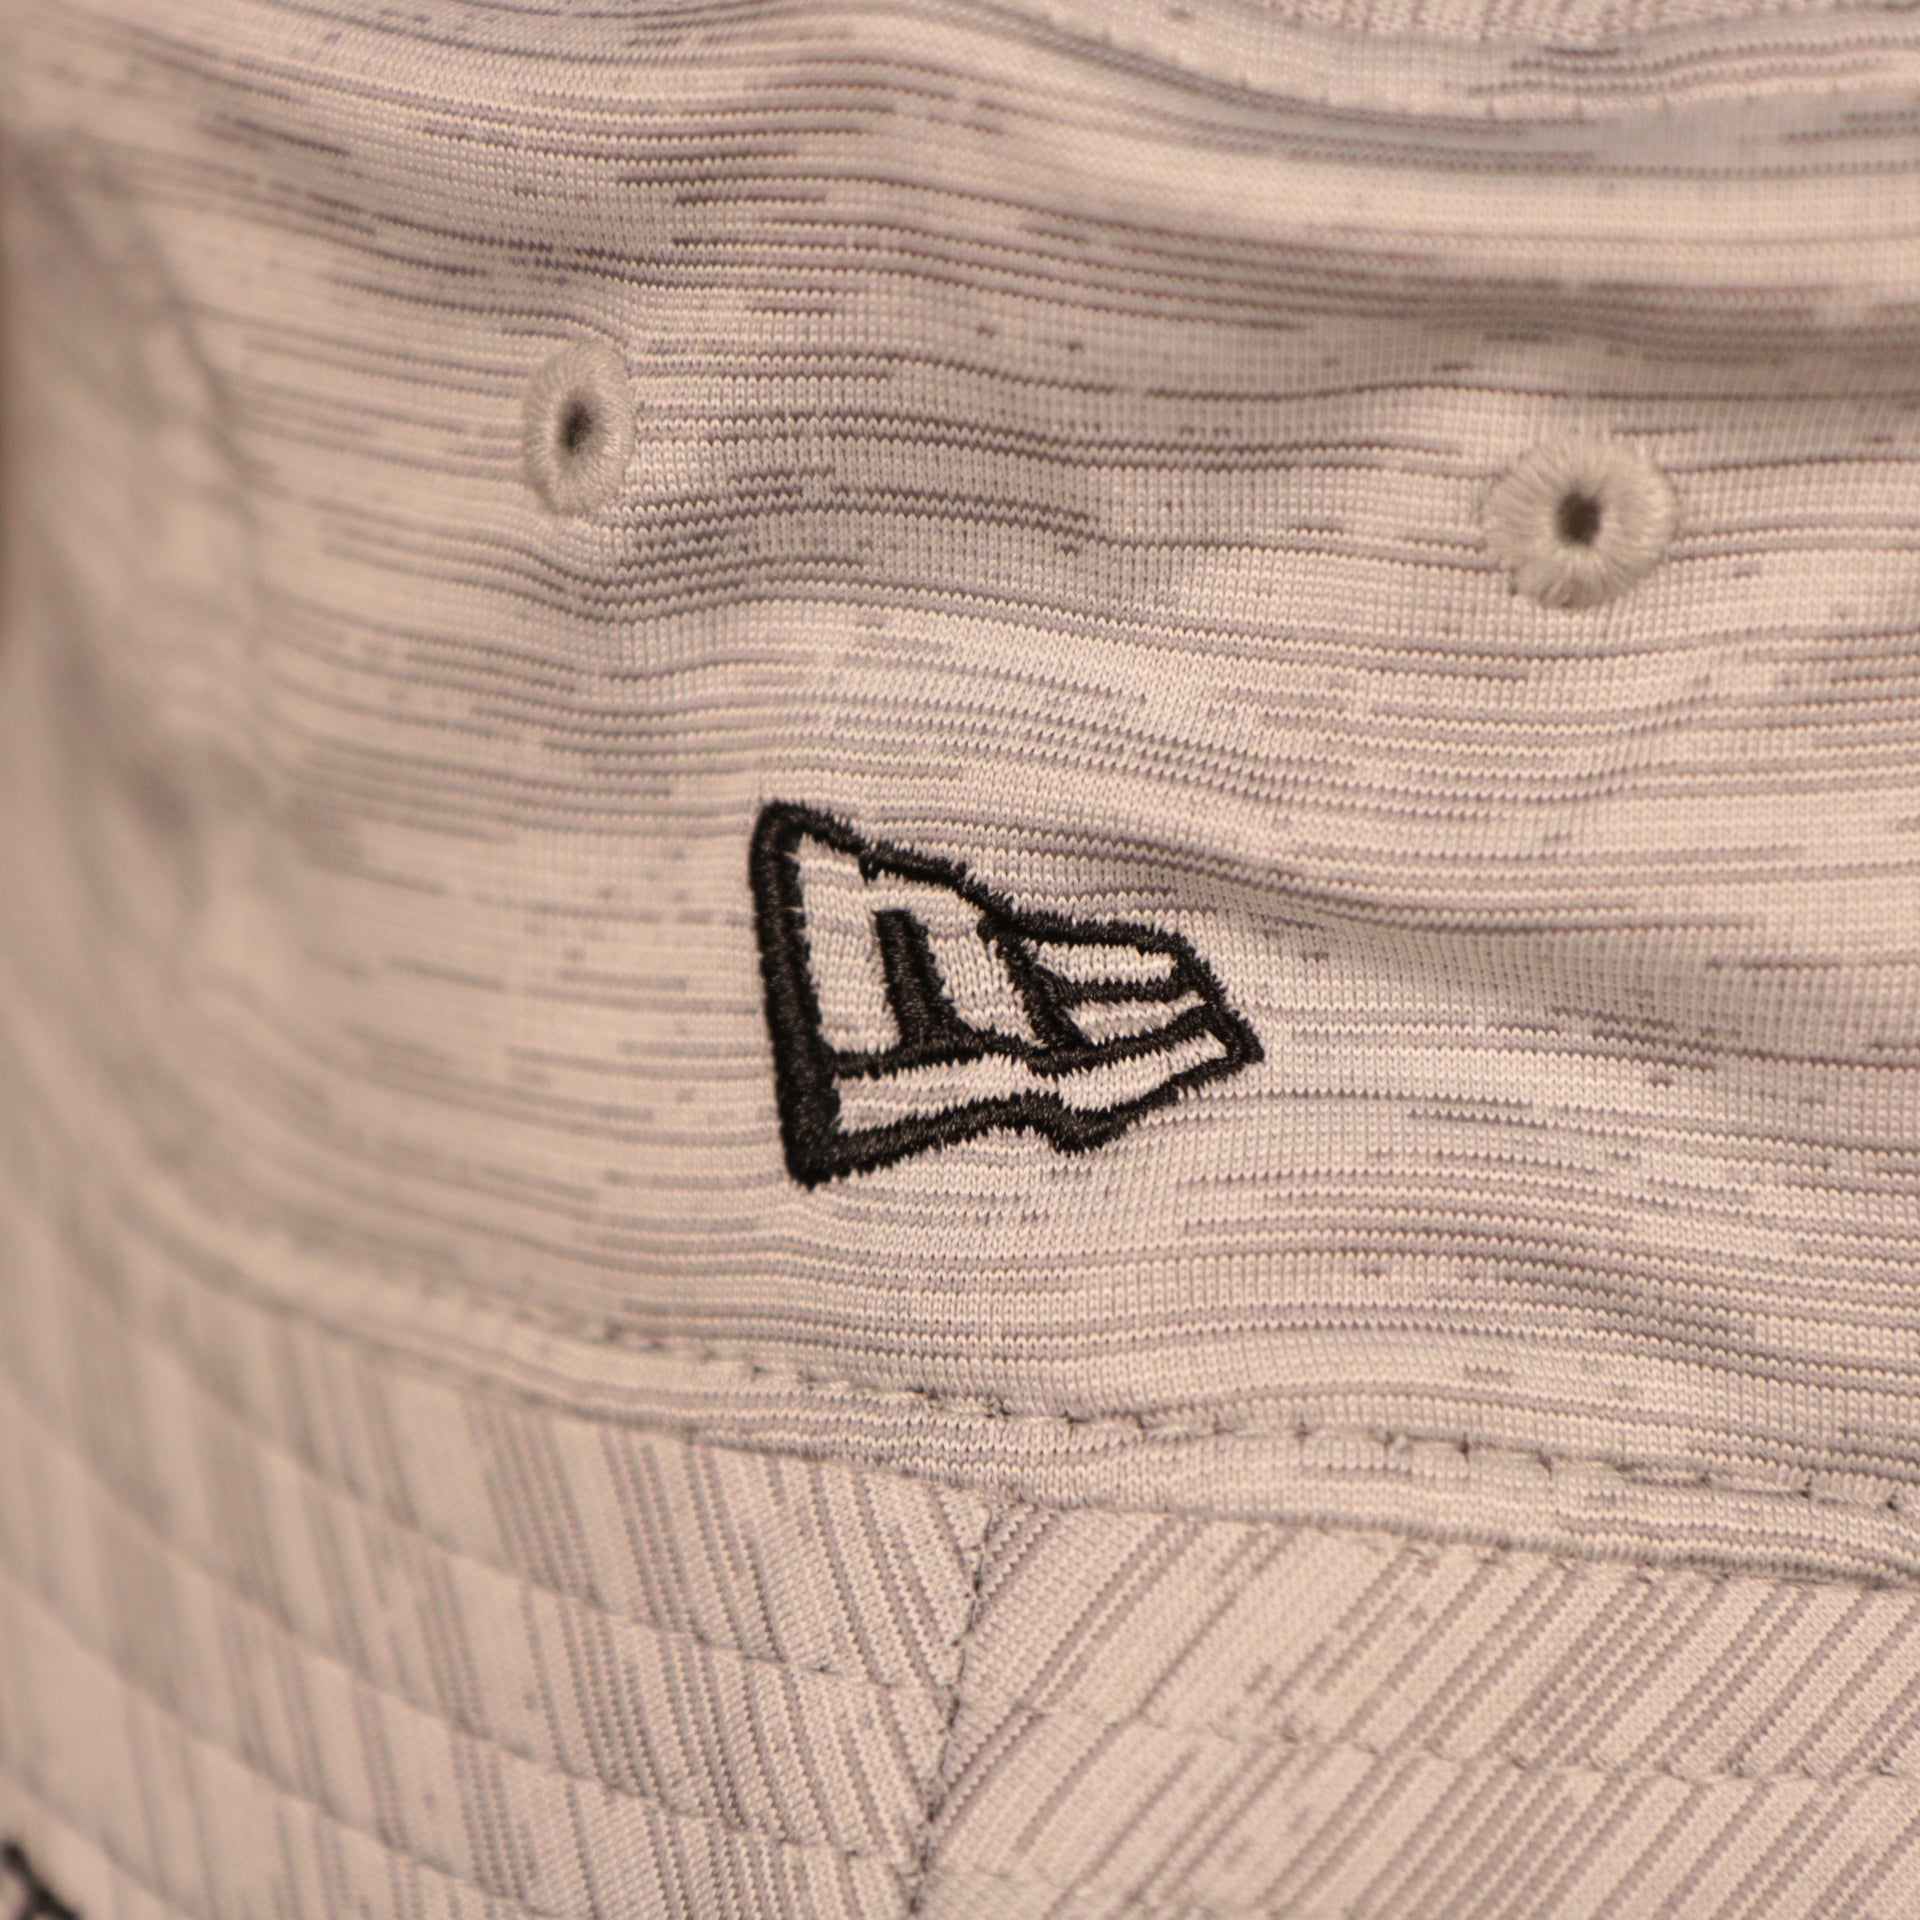 A closeup shot of the New Era patch on the side of the 2021 nfl on field bucket hat.